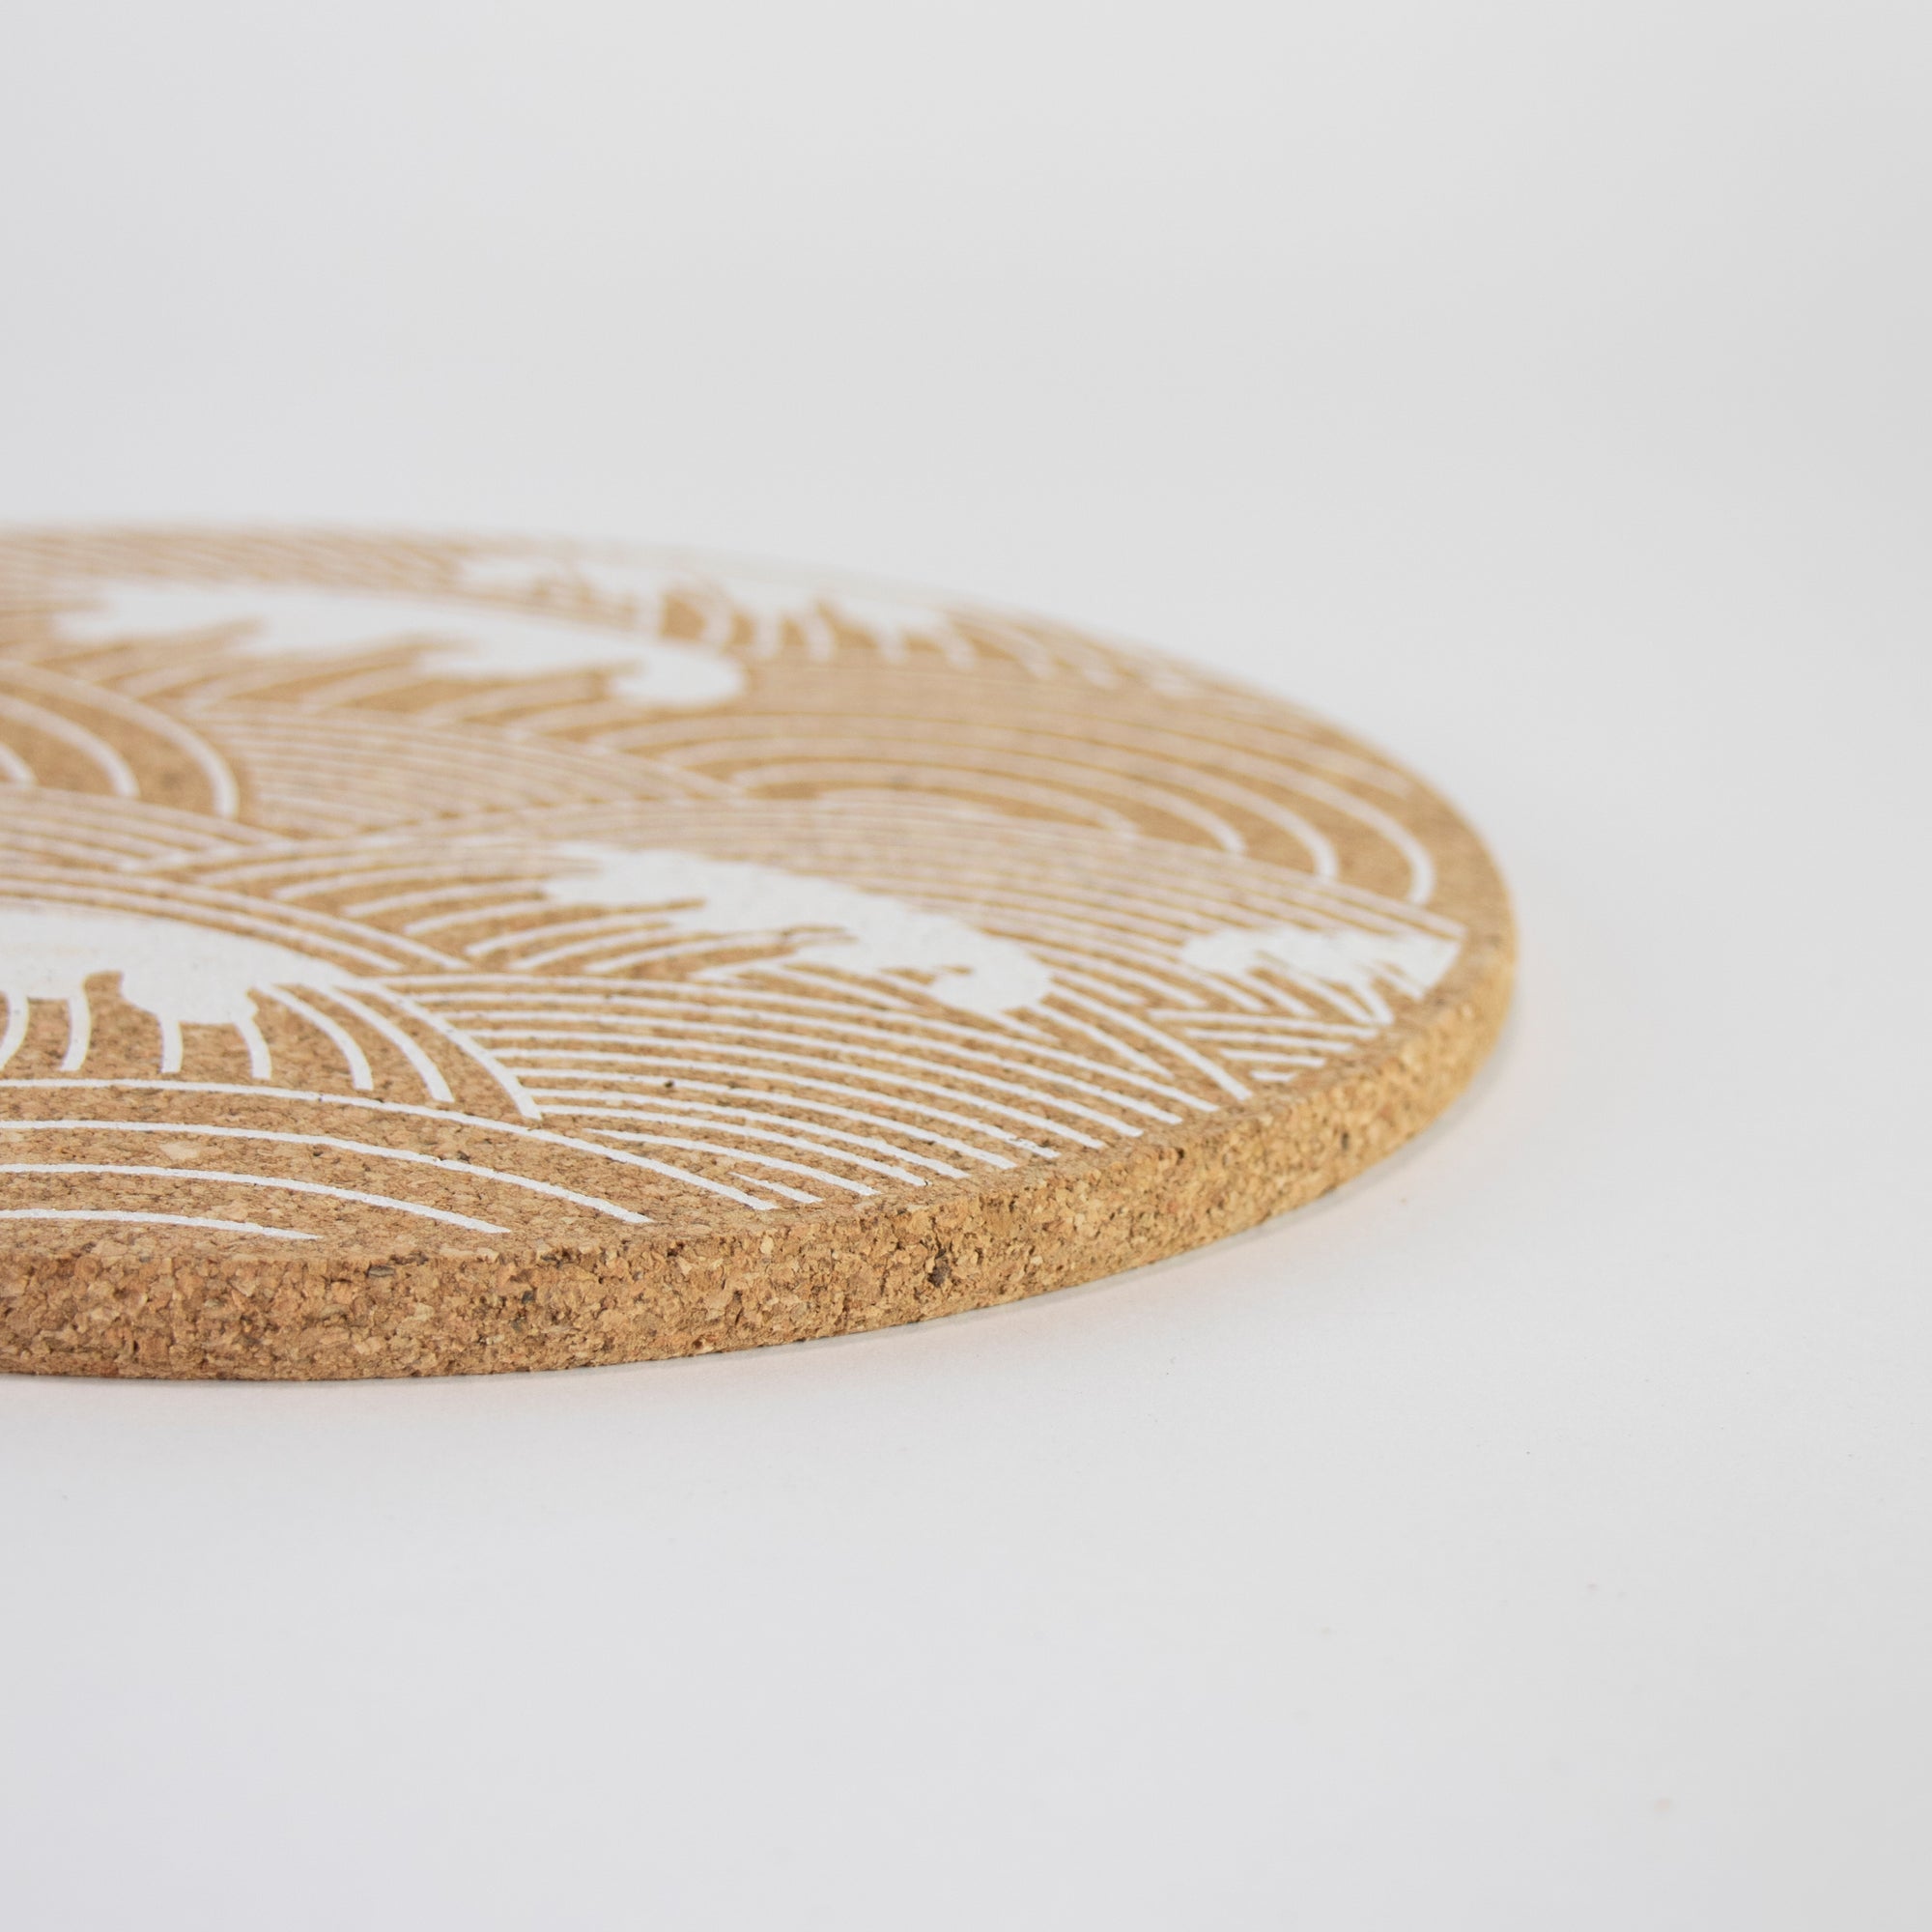 eco cork placemats and coasters. Wave design